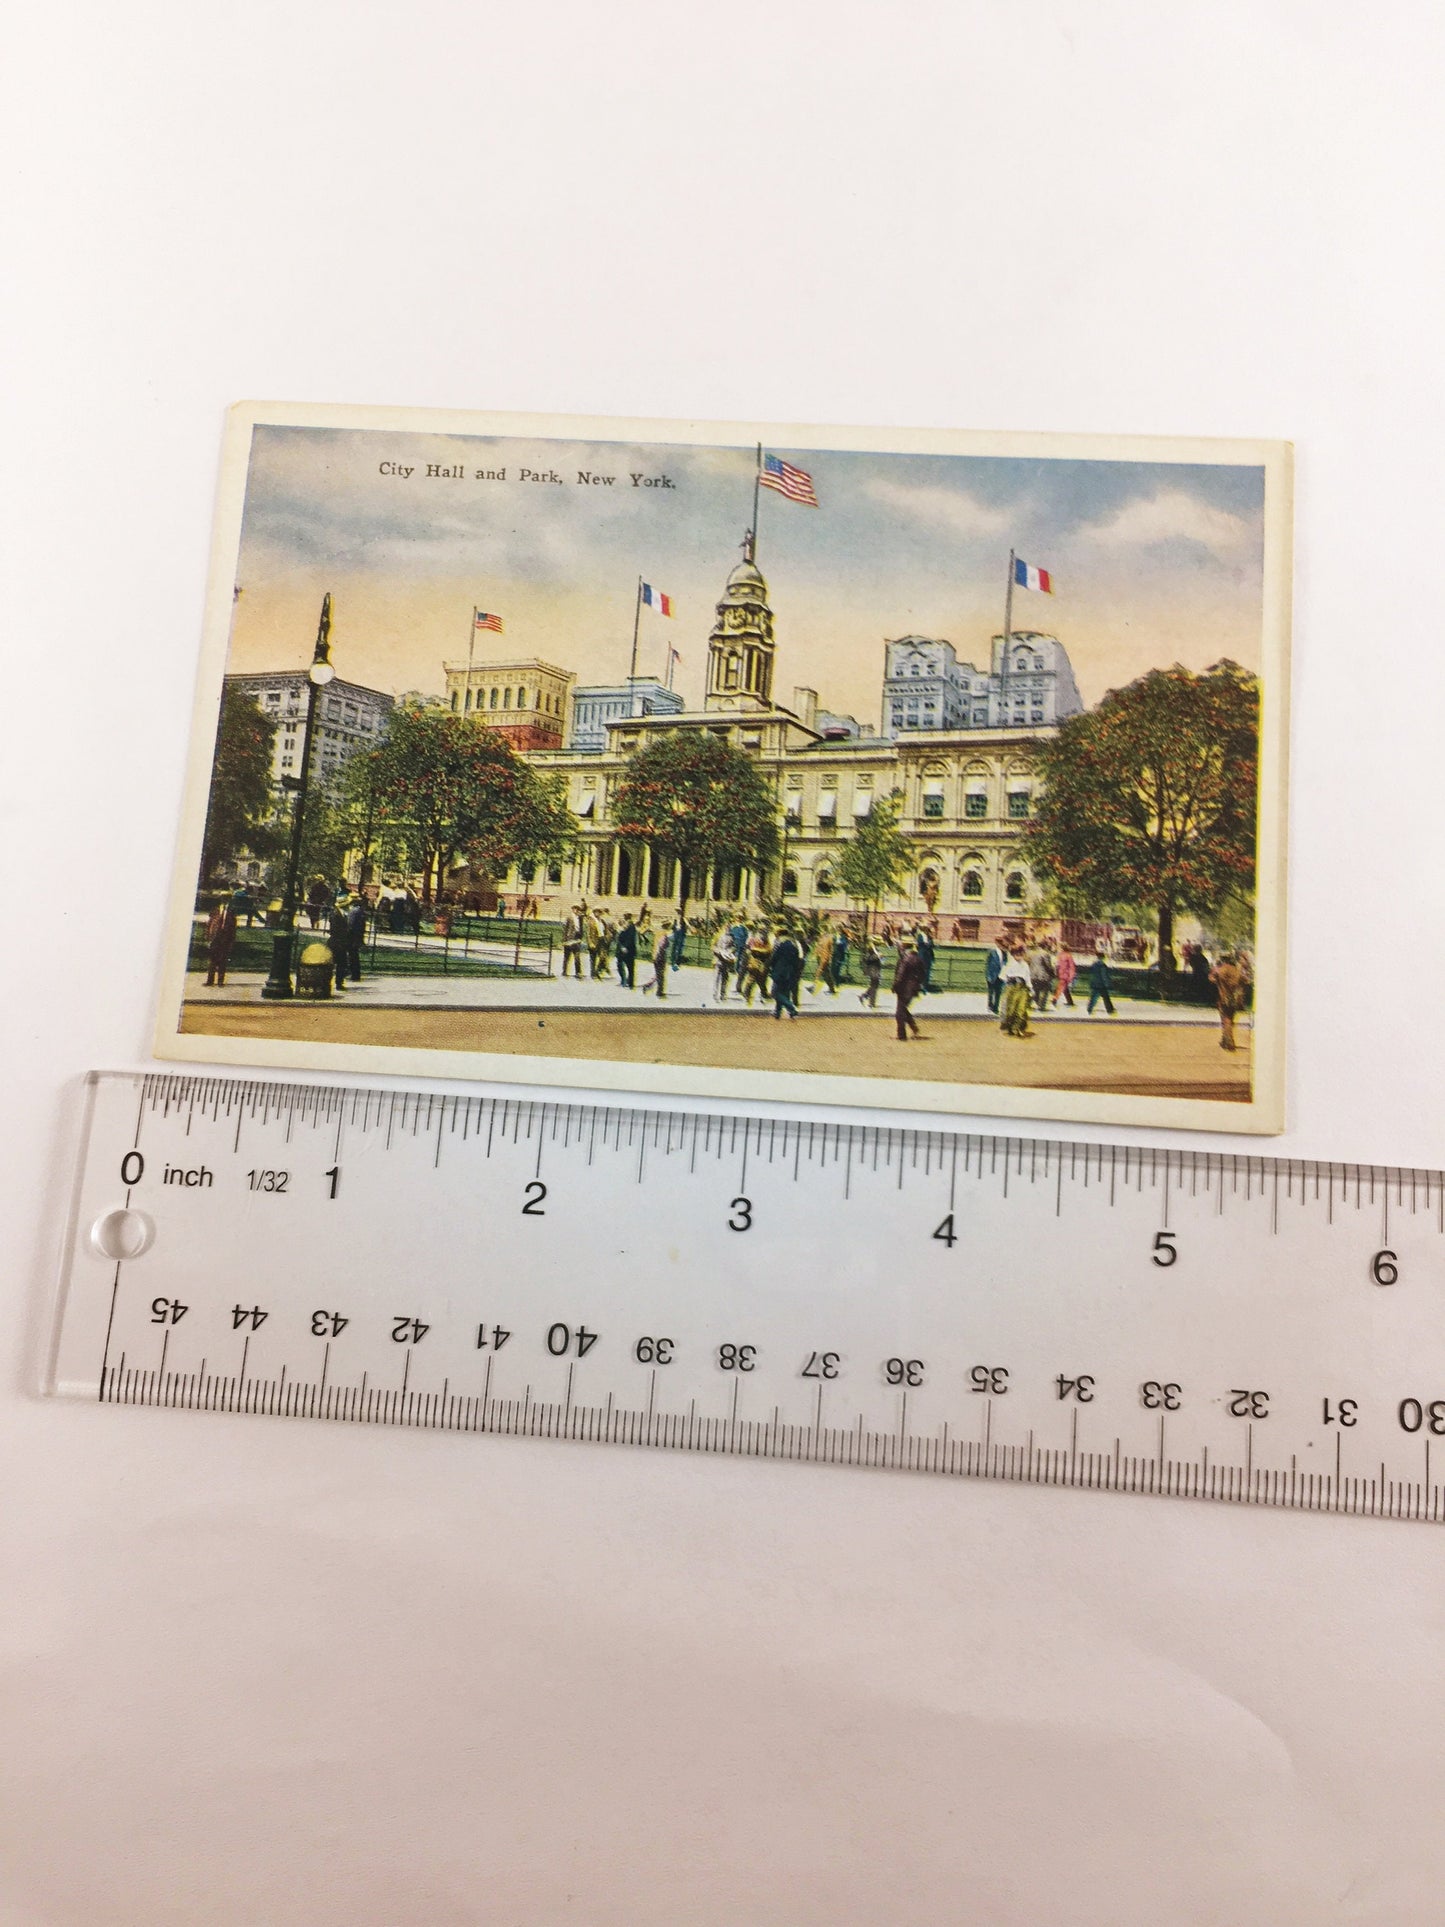 City Hall & Park New York City vintage postcard circa 1907. BEAUTIFUL unused collectible art perfect for framing!